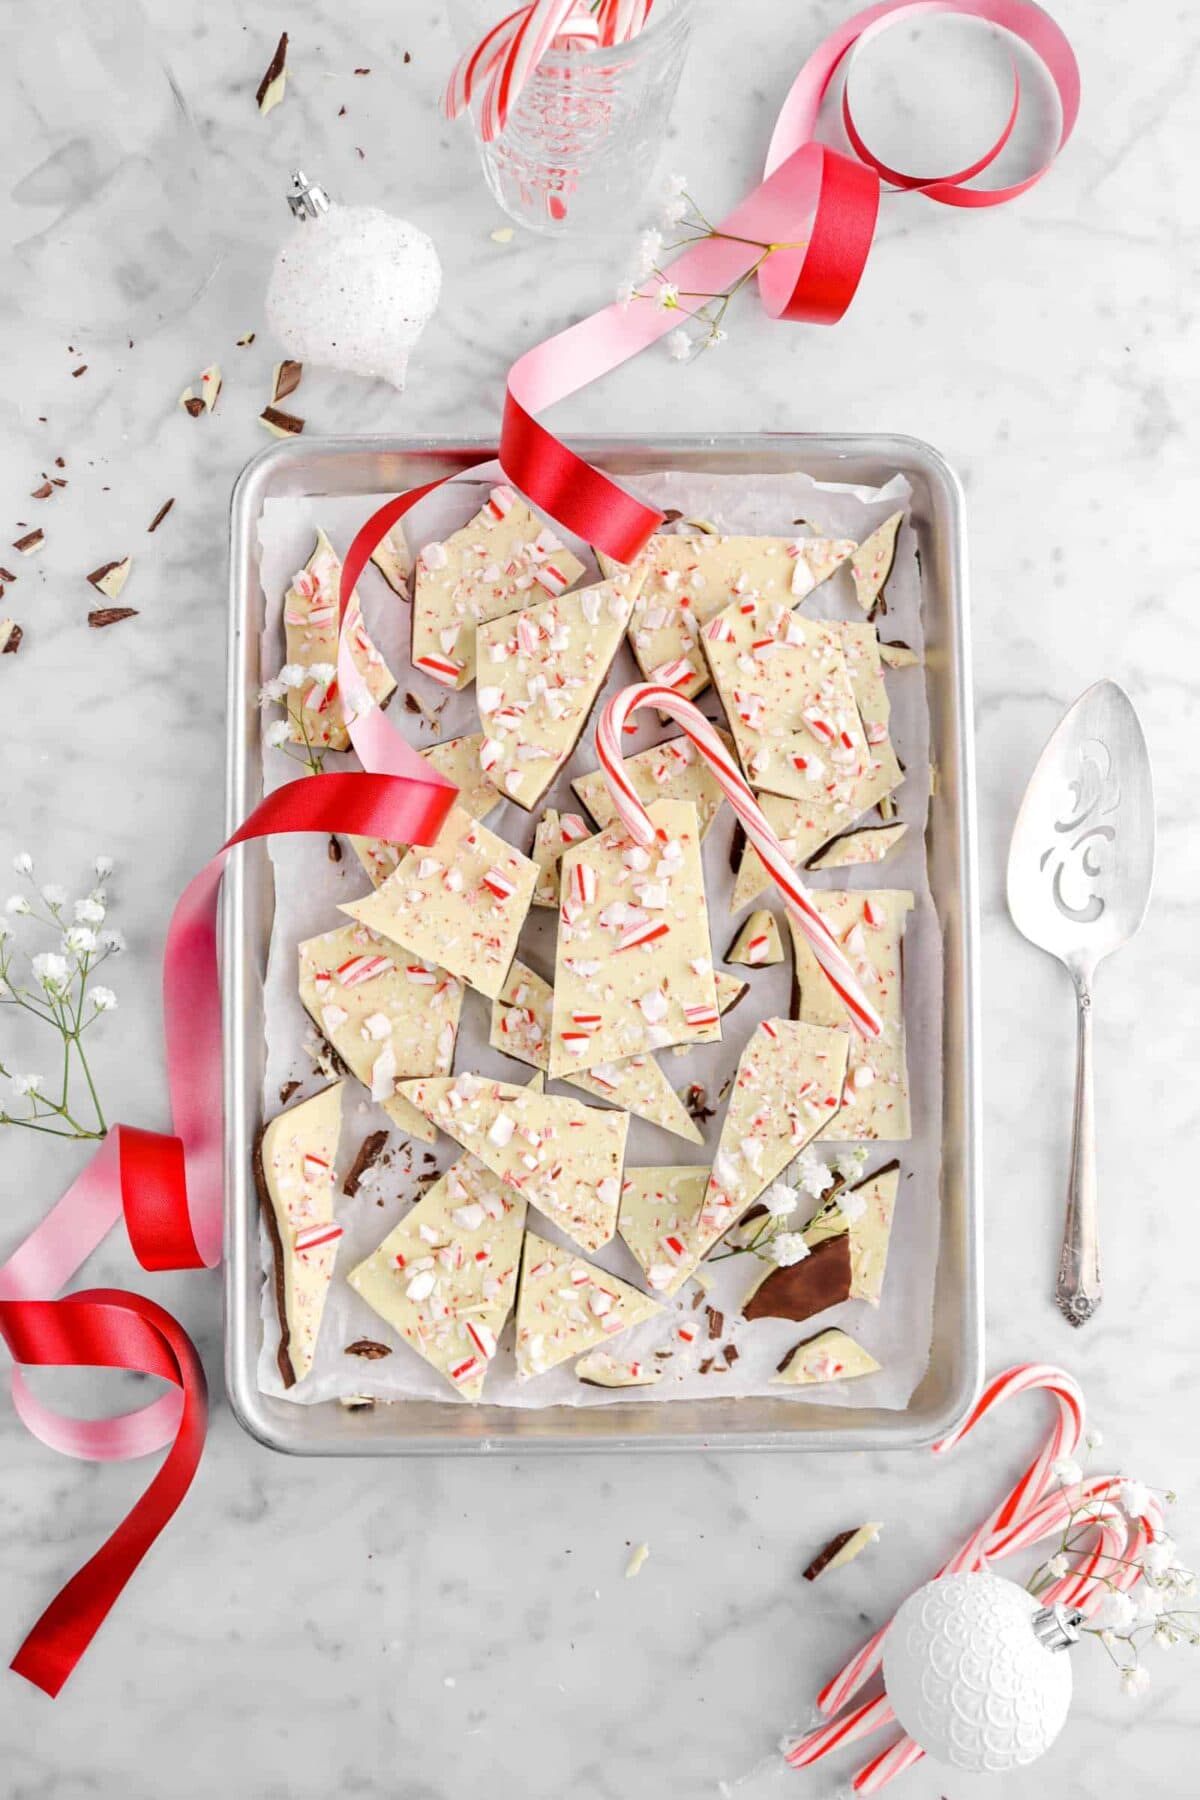 peppermint bark on sheet pan with red ribbon, white ornaments, white flowers, and candy canes